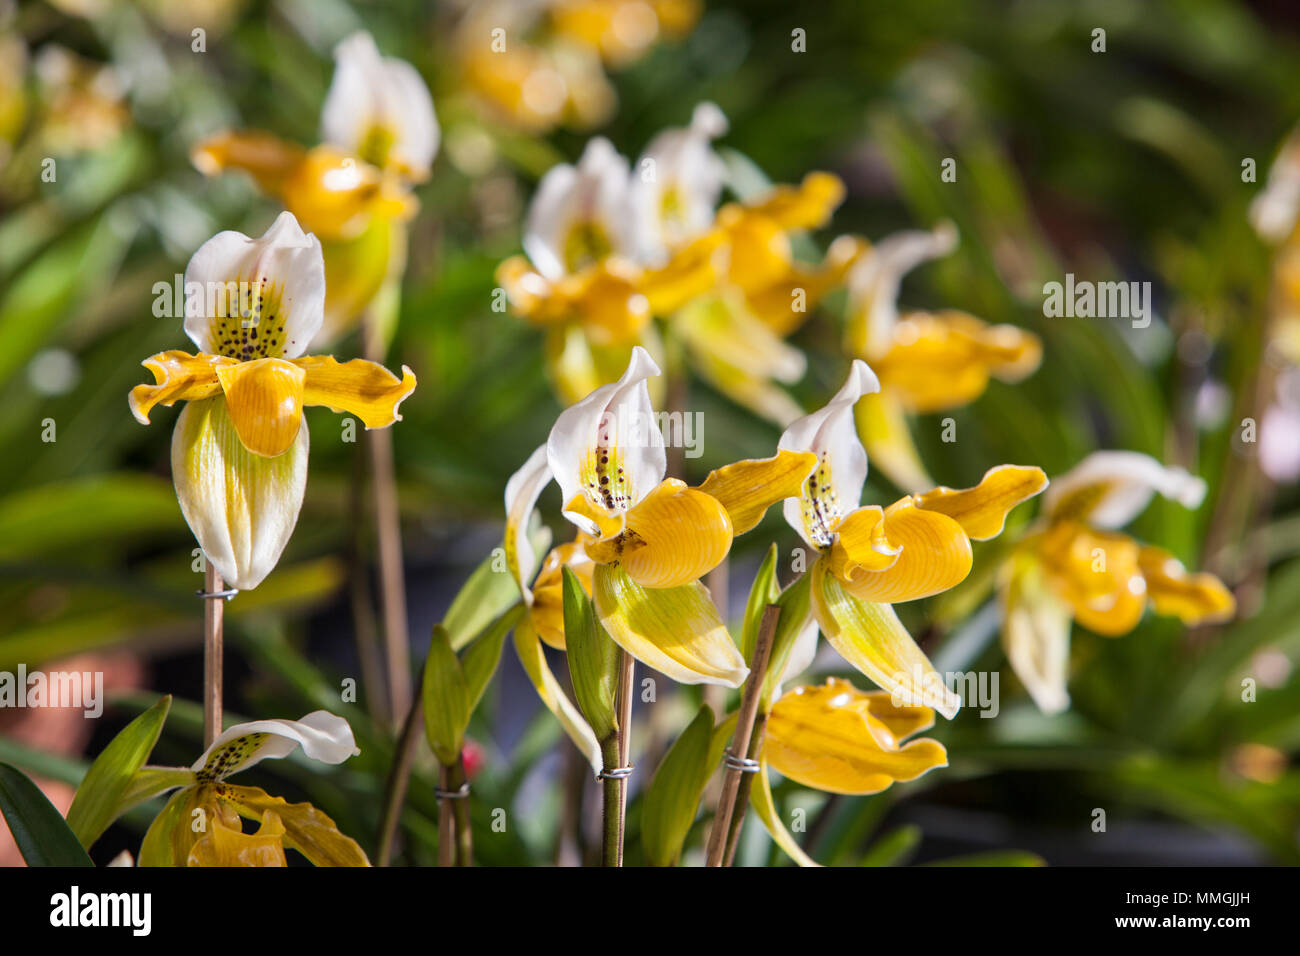 Paphiopedilum exul  orchid flowers with two on Black background. Stock Photo